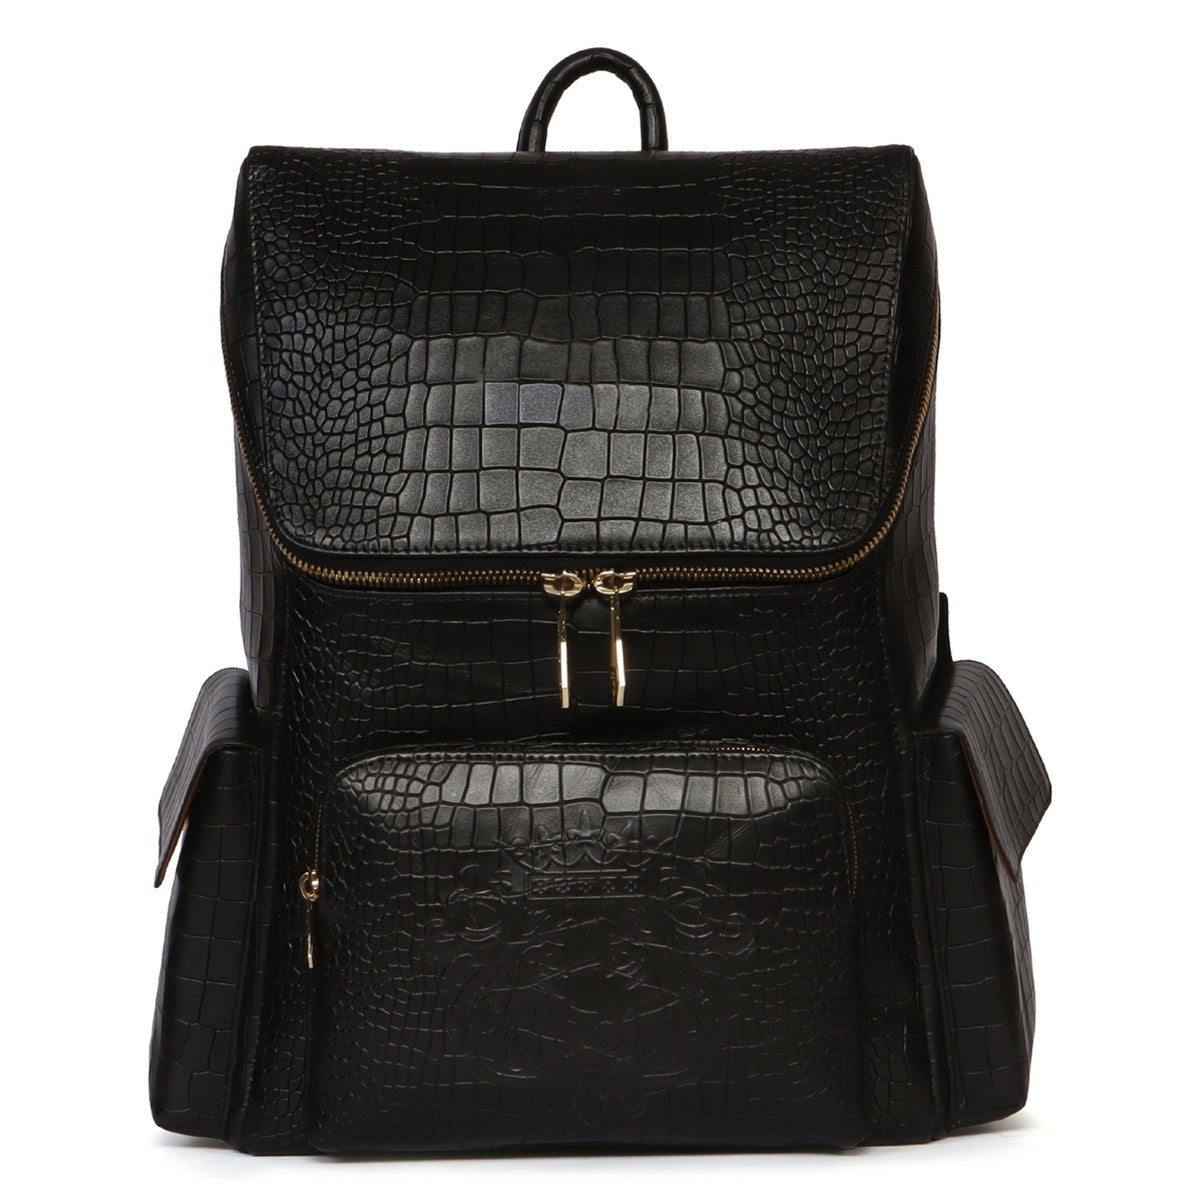 Top Opening Black Backpack Zip Compartment Croco Textured Leather